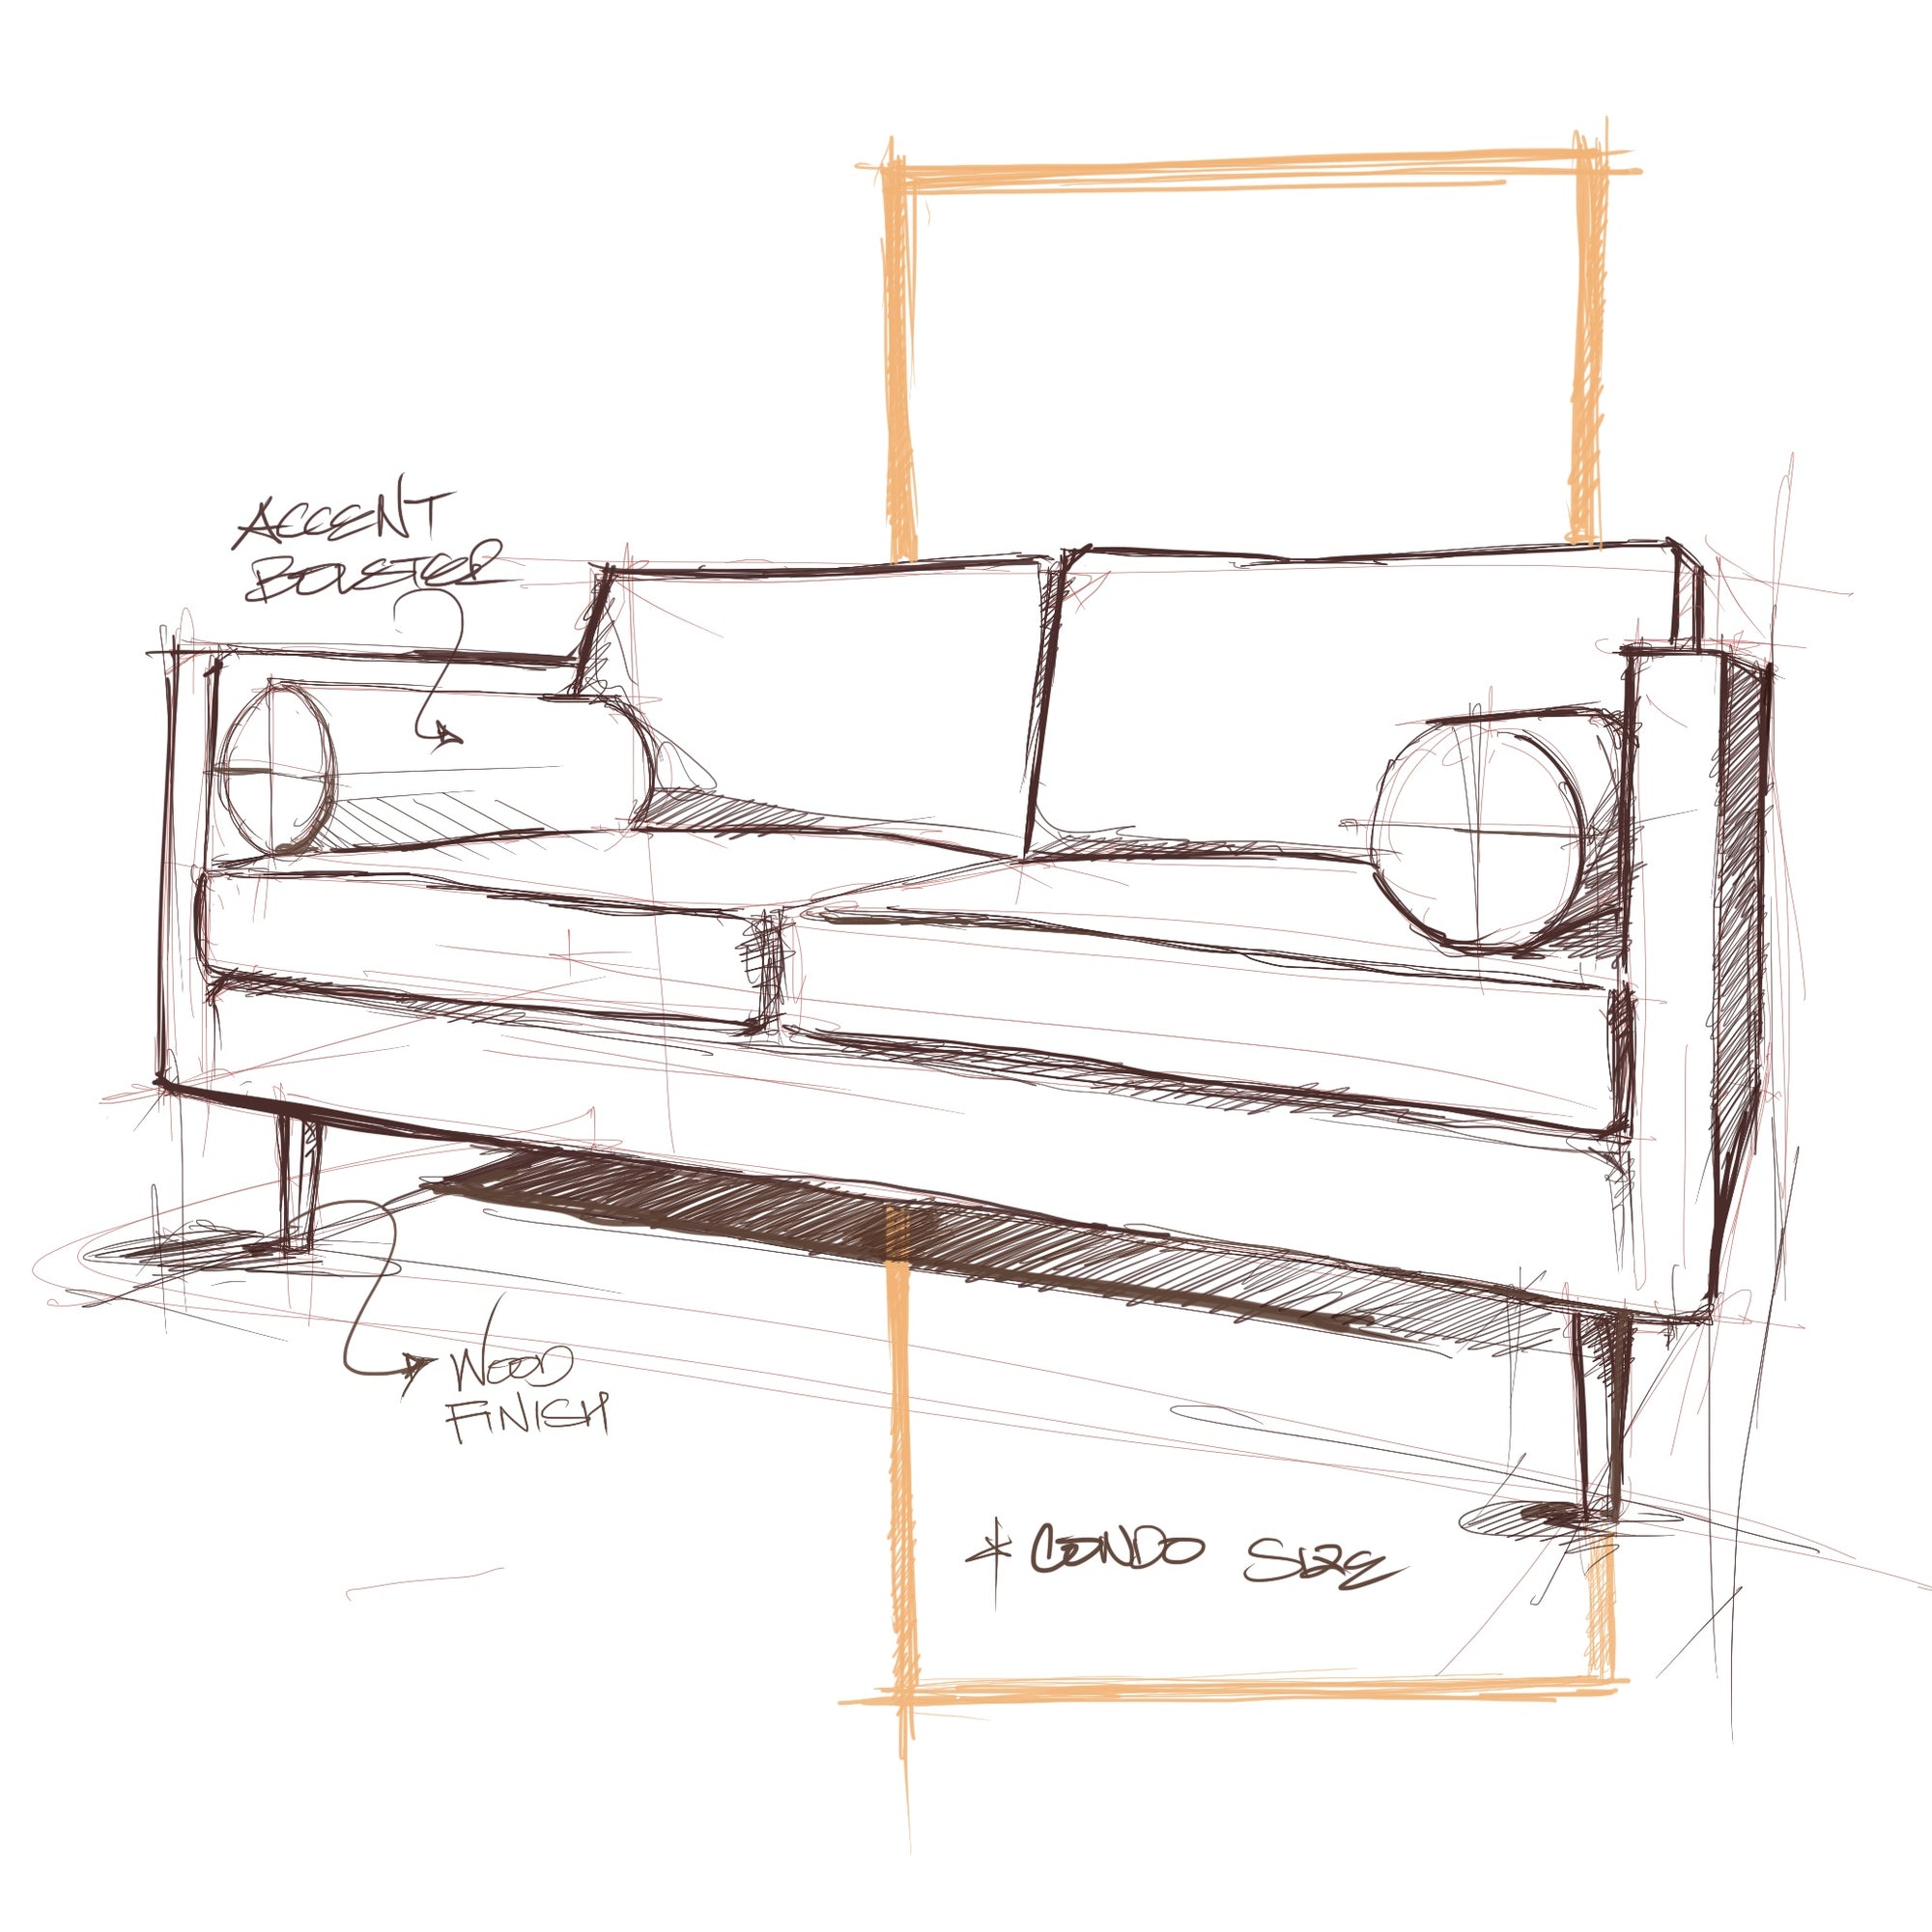 sketch drawing of a sofa